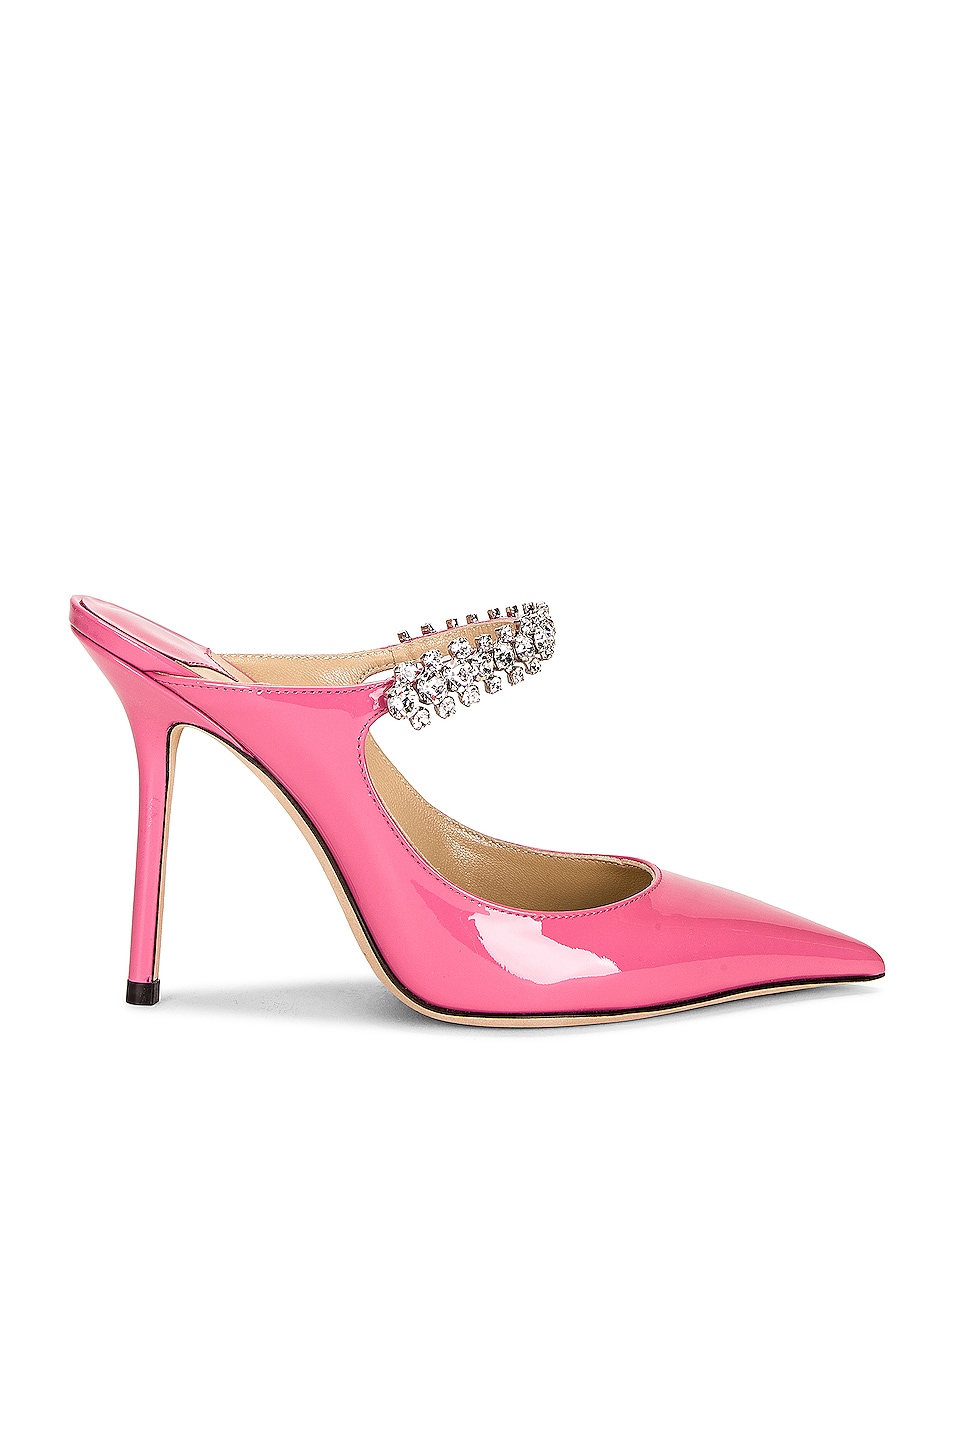 Image 1 of Jimmy Choo Bing 100 Patent Leather Mule in Candy Pink